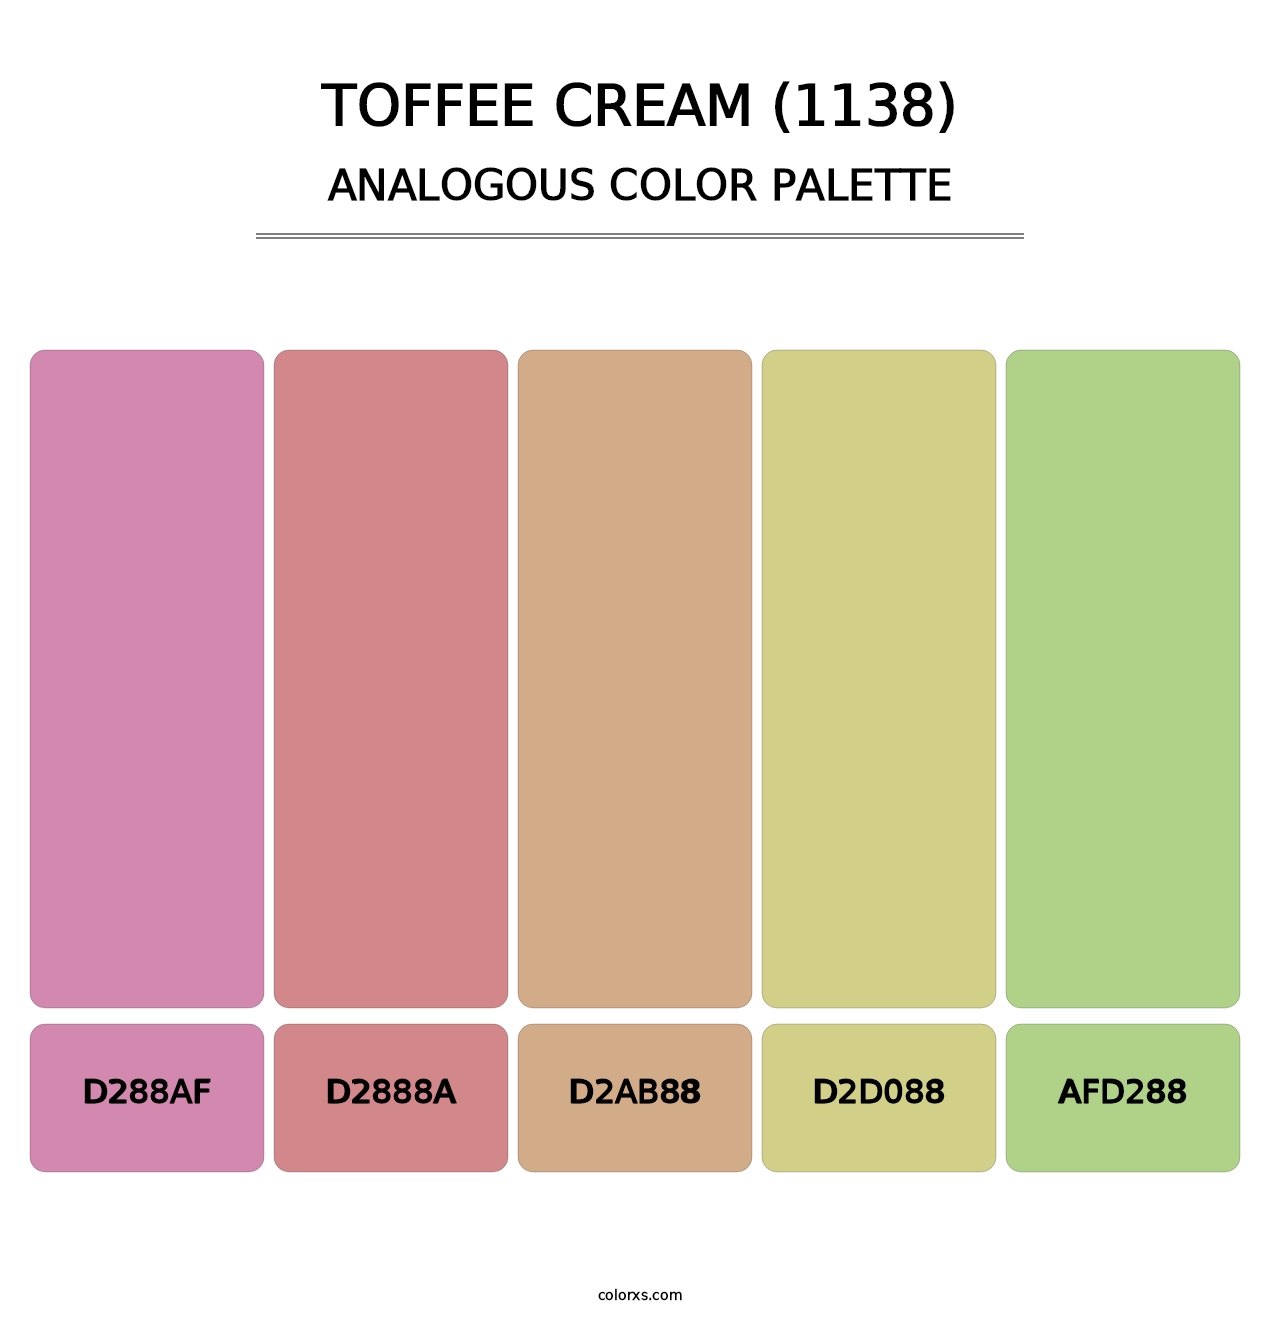 Toffee Cream (1138) - Analogous Color Palette